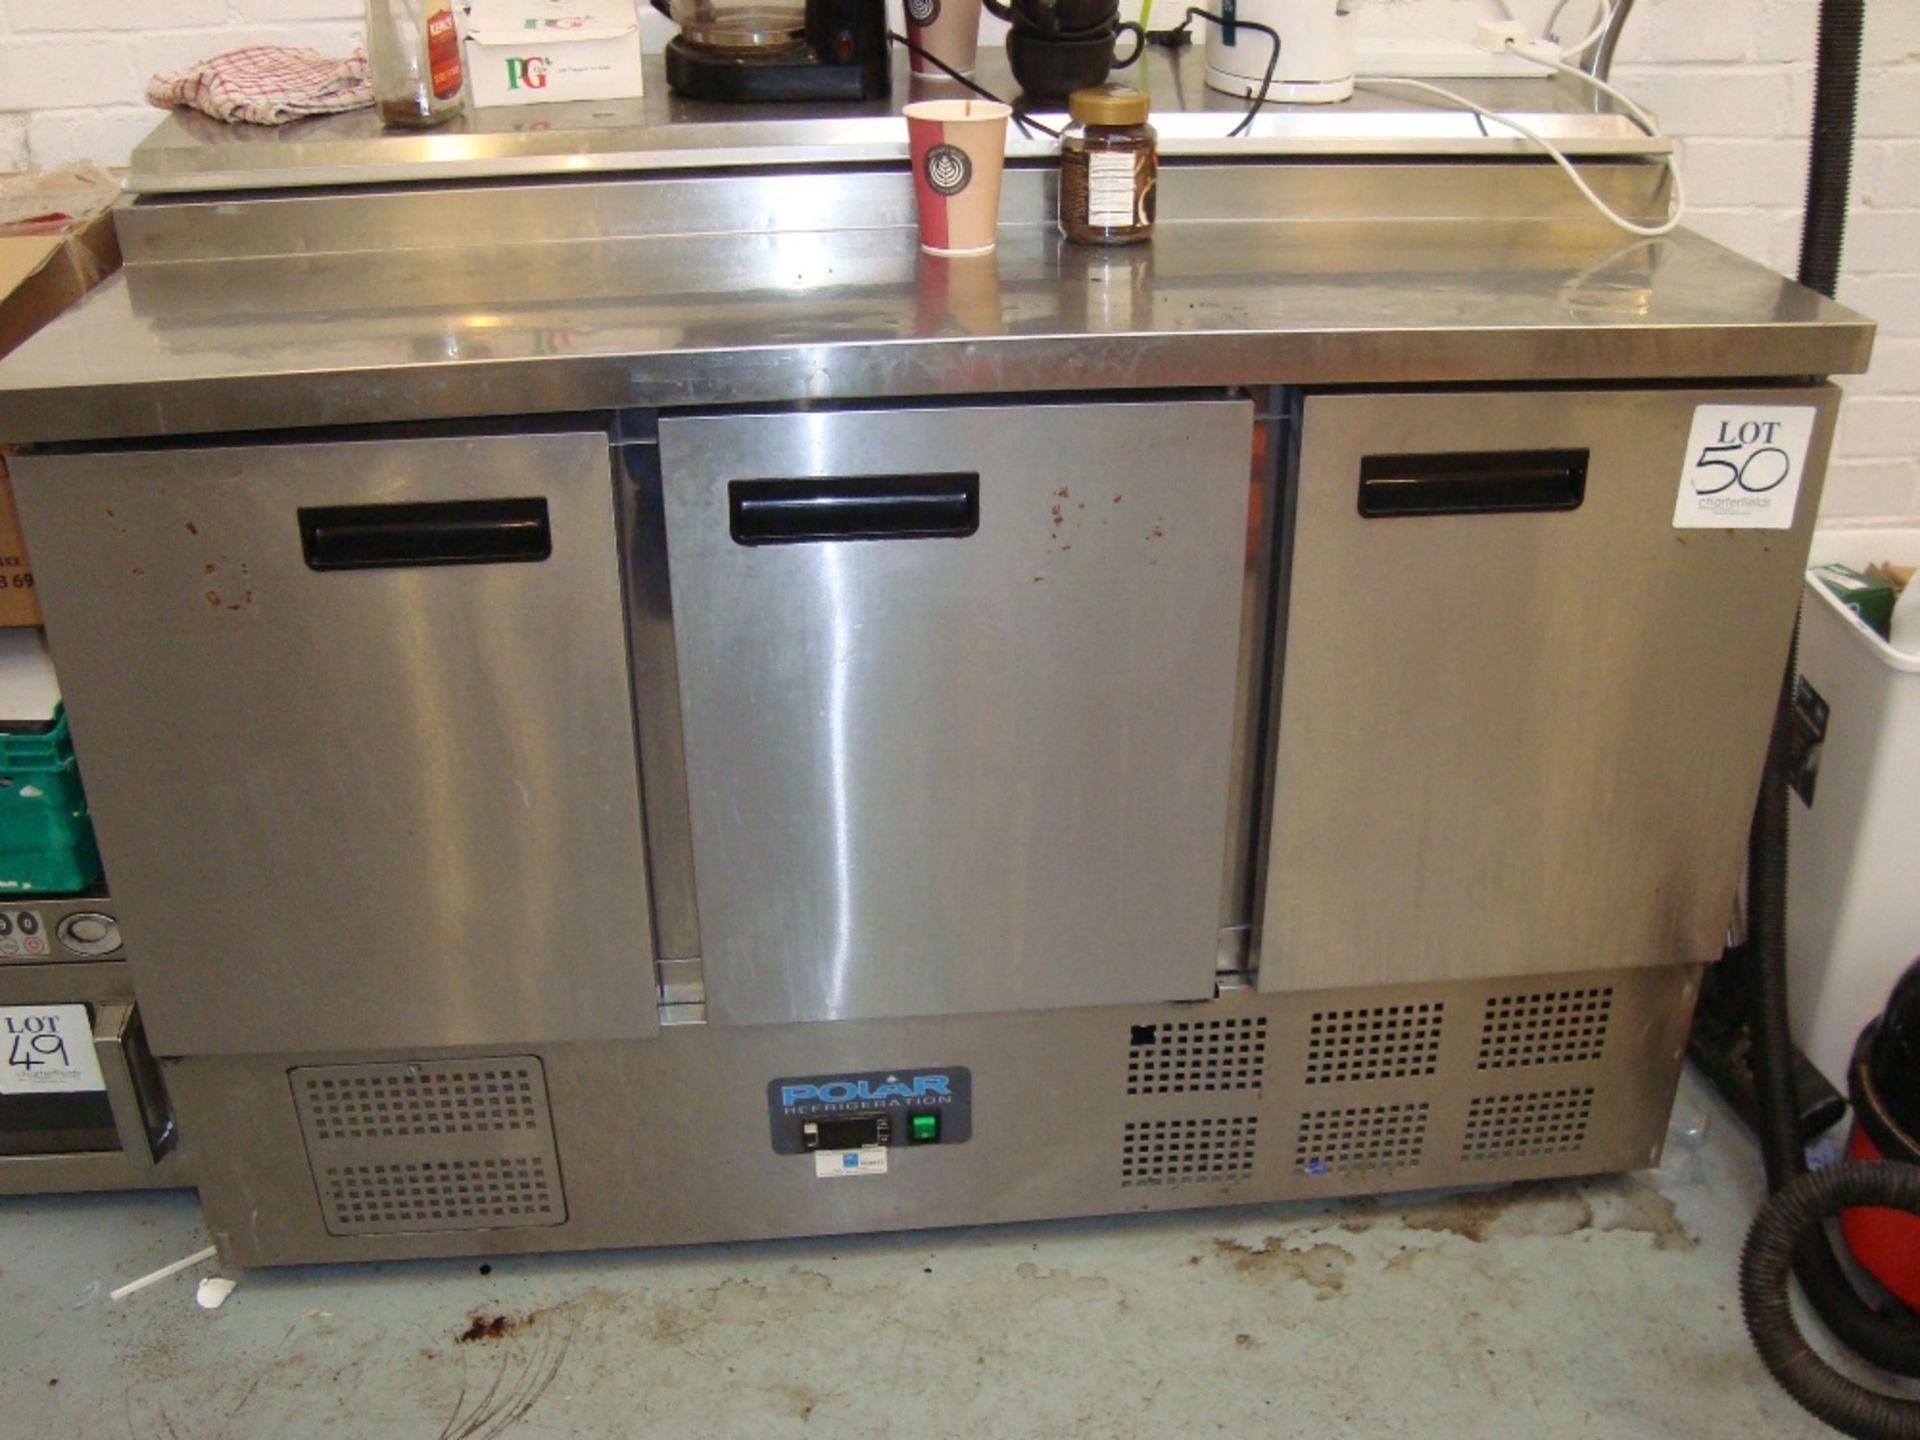 A Polar G605 low height stainless steel three door chiller with bain marie top Serial No. 6210585